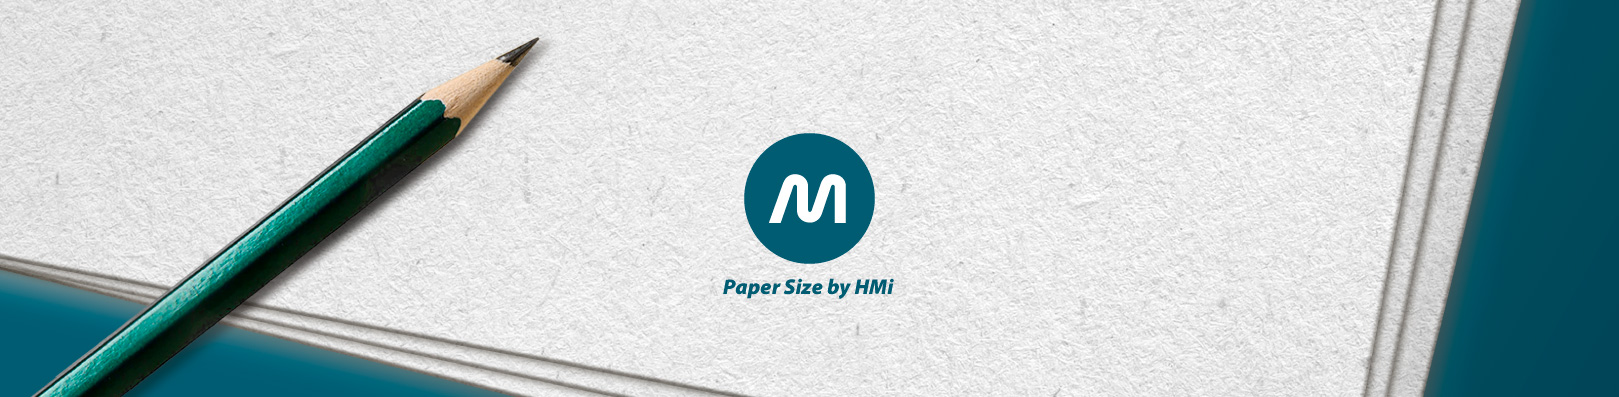 Paper size banner | Exact paper sizes by HMi GmbH | FInd the best paper size matching your needs with HMi Printing company from Düsseldorf